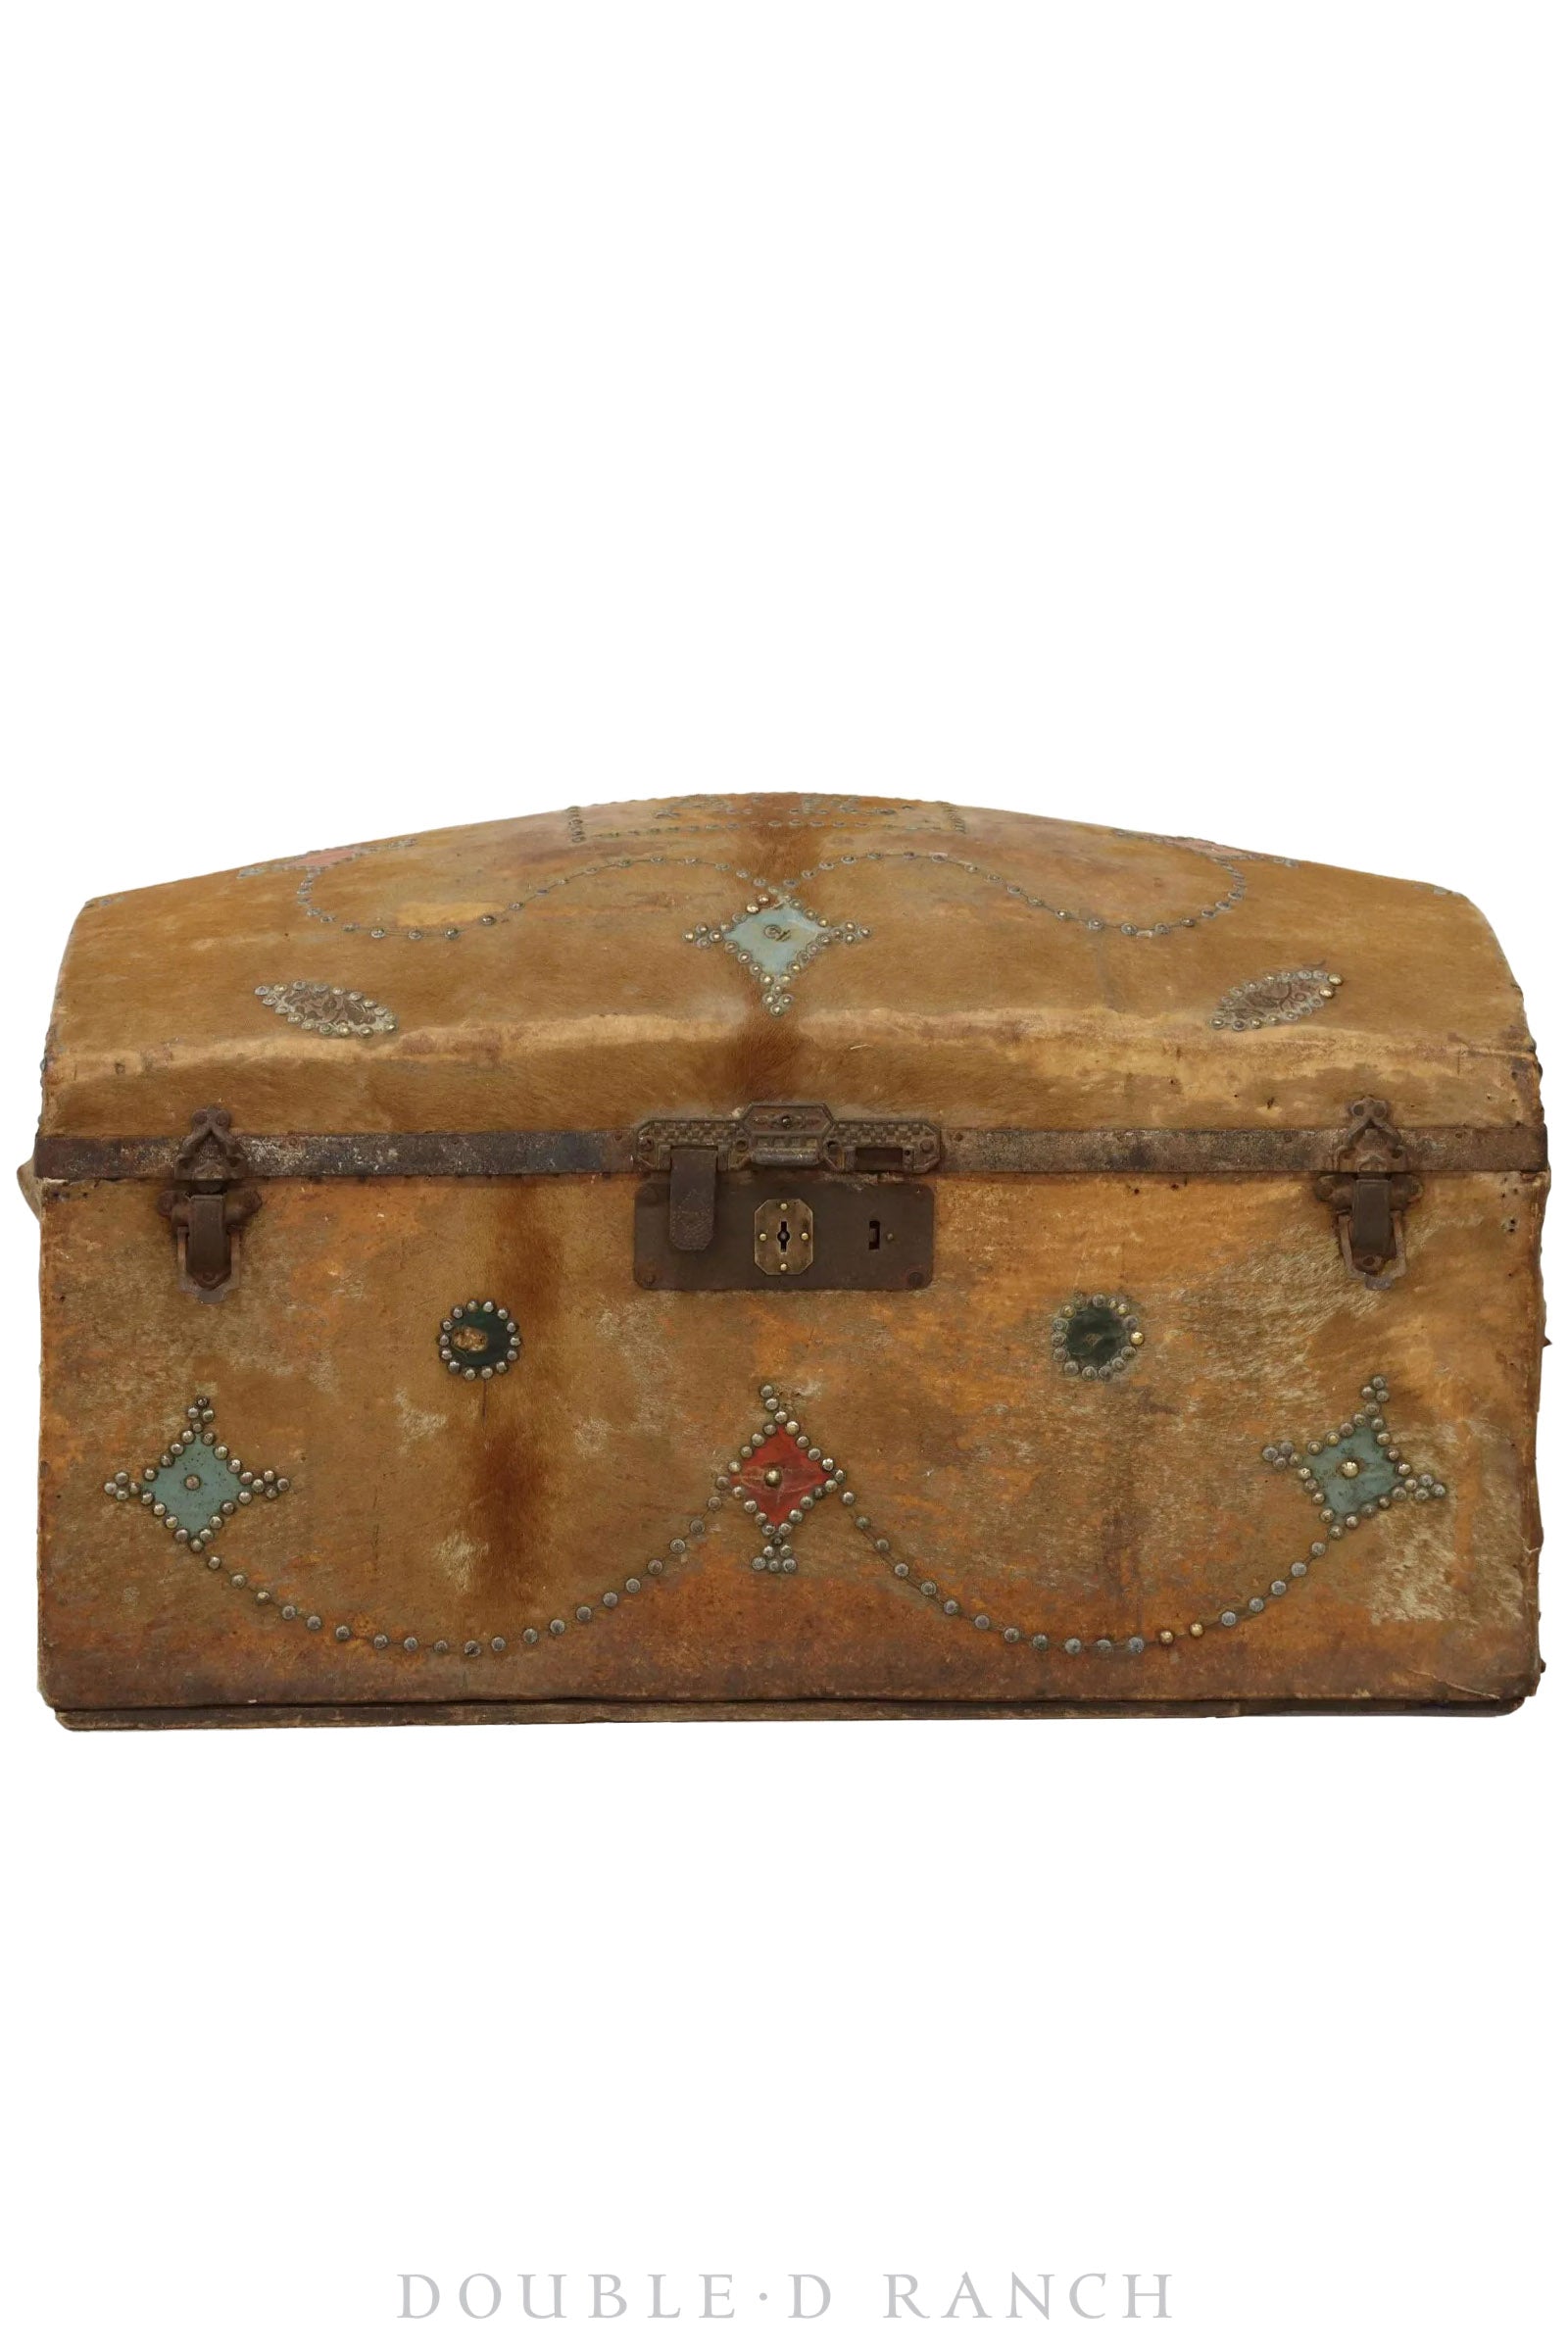 Home, Furniture, Trunk, Stagecoach, Hair On with Stud Embellishment, Antique 19th Century, 196